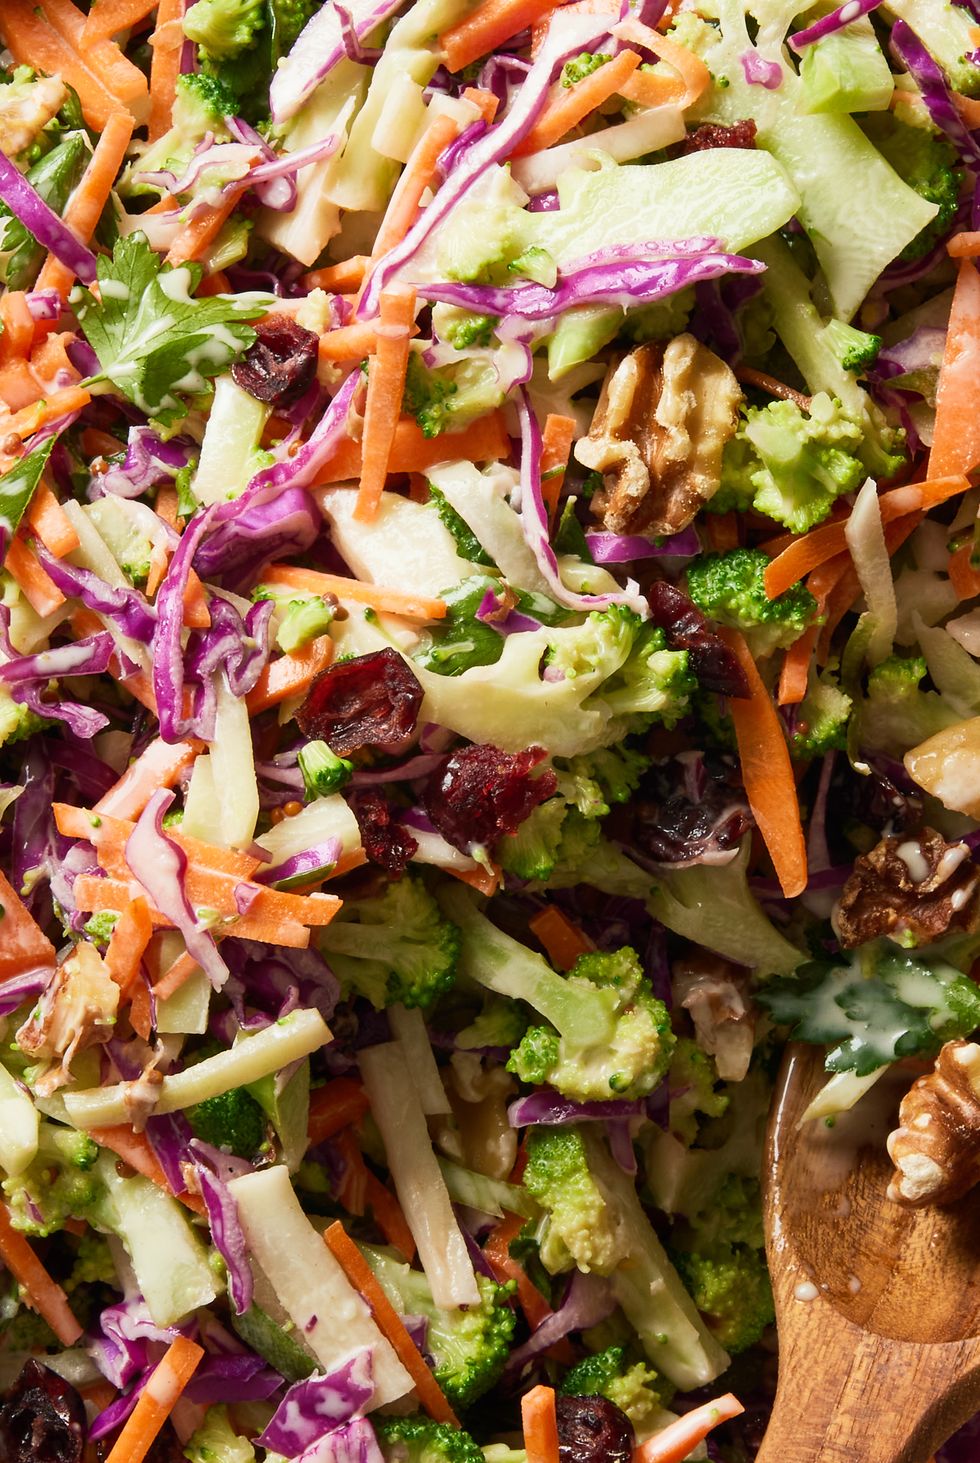 broccoli slaw with cabbage, carrots, scallions, toasted walnuts, dried cranberries, and maple dijon dressing